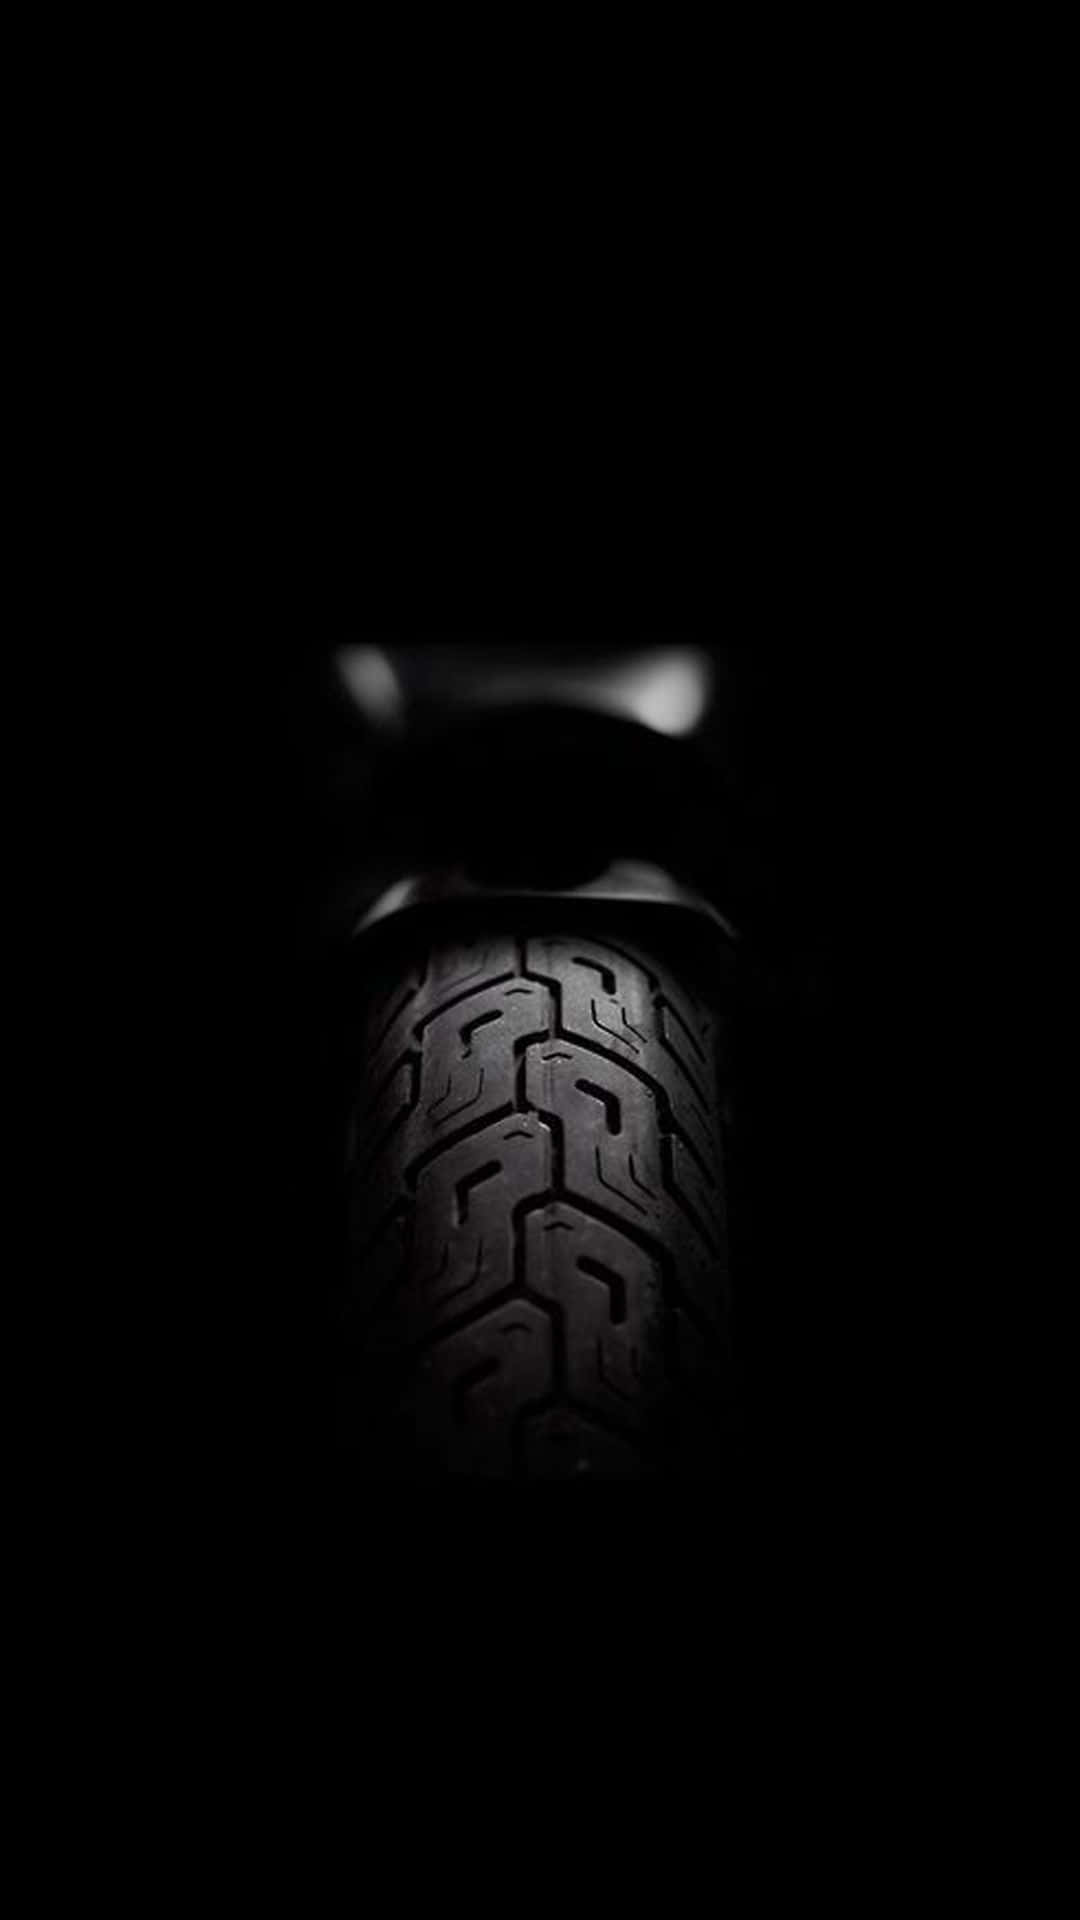 A Close Up Of A Tire In The Dark Wallpaper